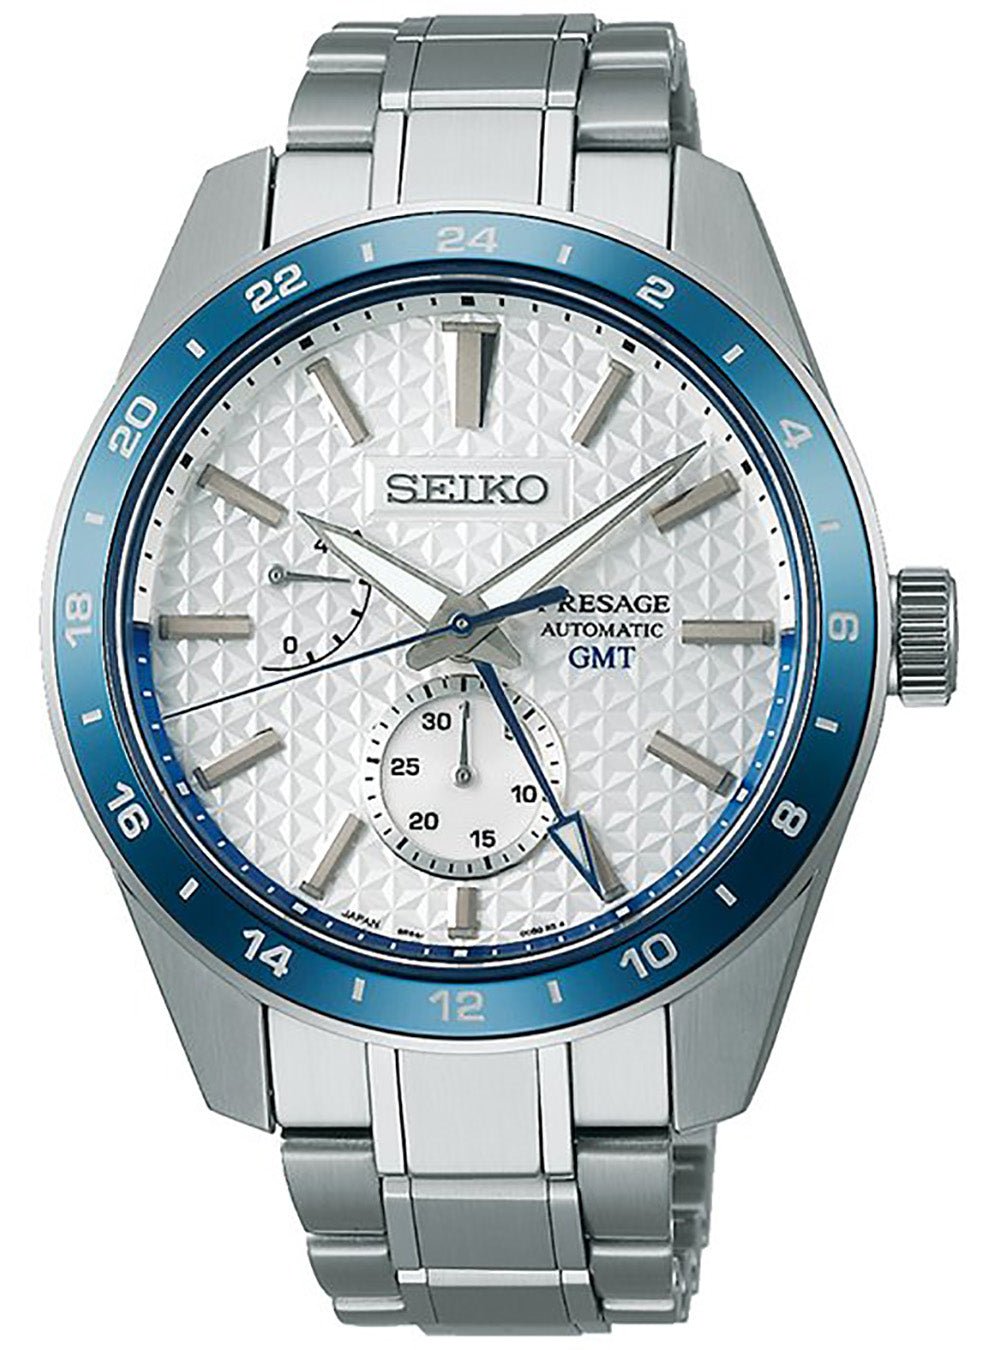 SEIKO MECHANICAL PRESAGE 140TH ANNIVERSARY SARF007 LIMITED EDITION MADE IN JAPAN JDM